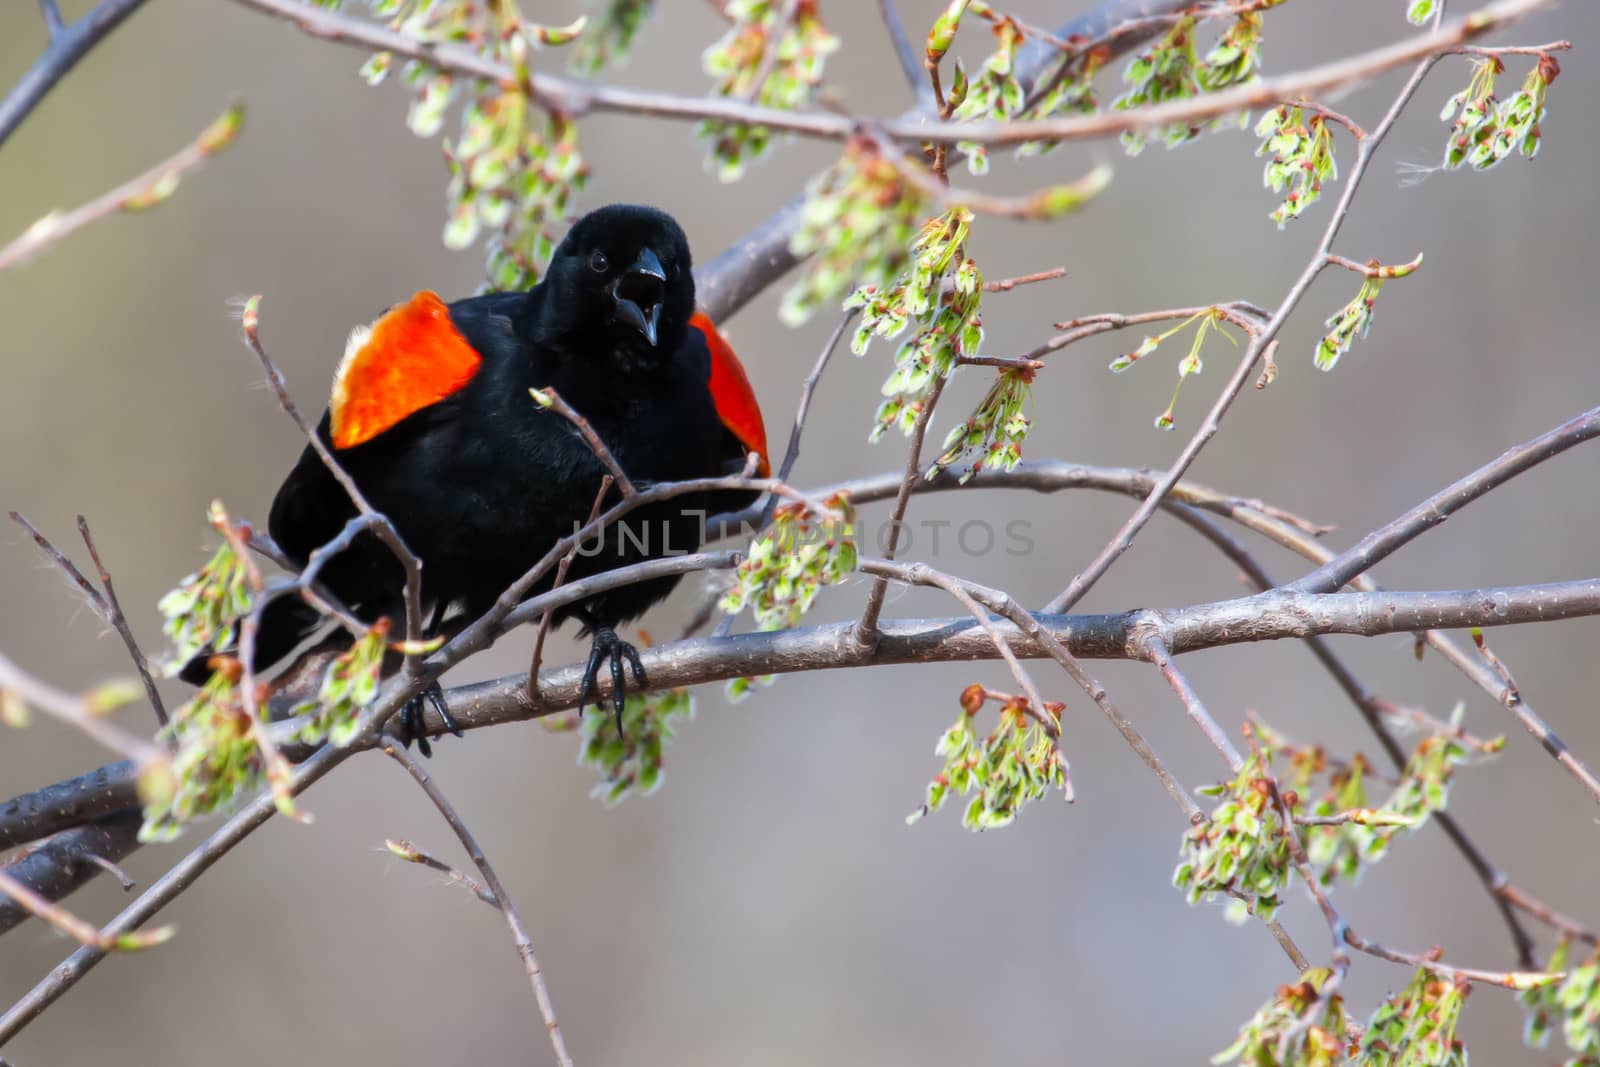 Male Red-winged Blackbird mad in a tree in soft focus